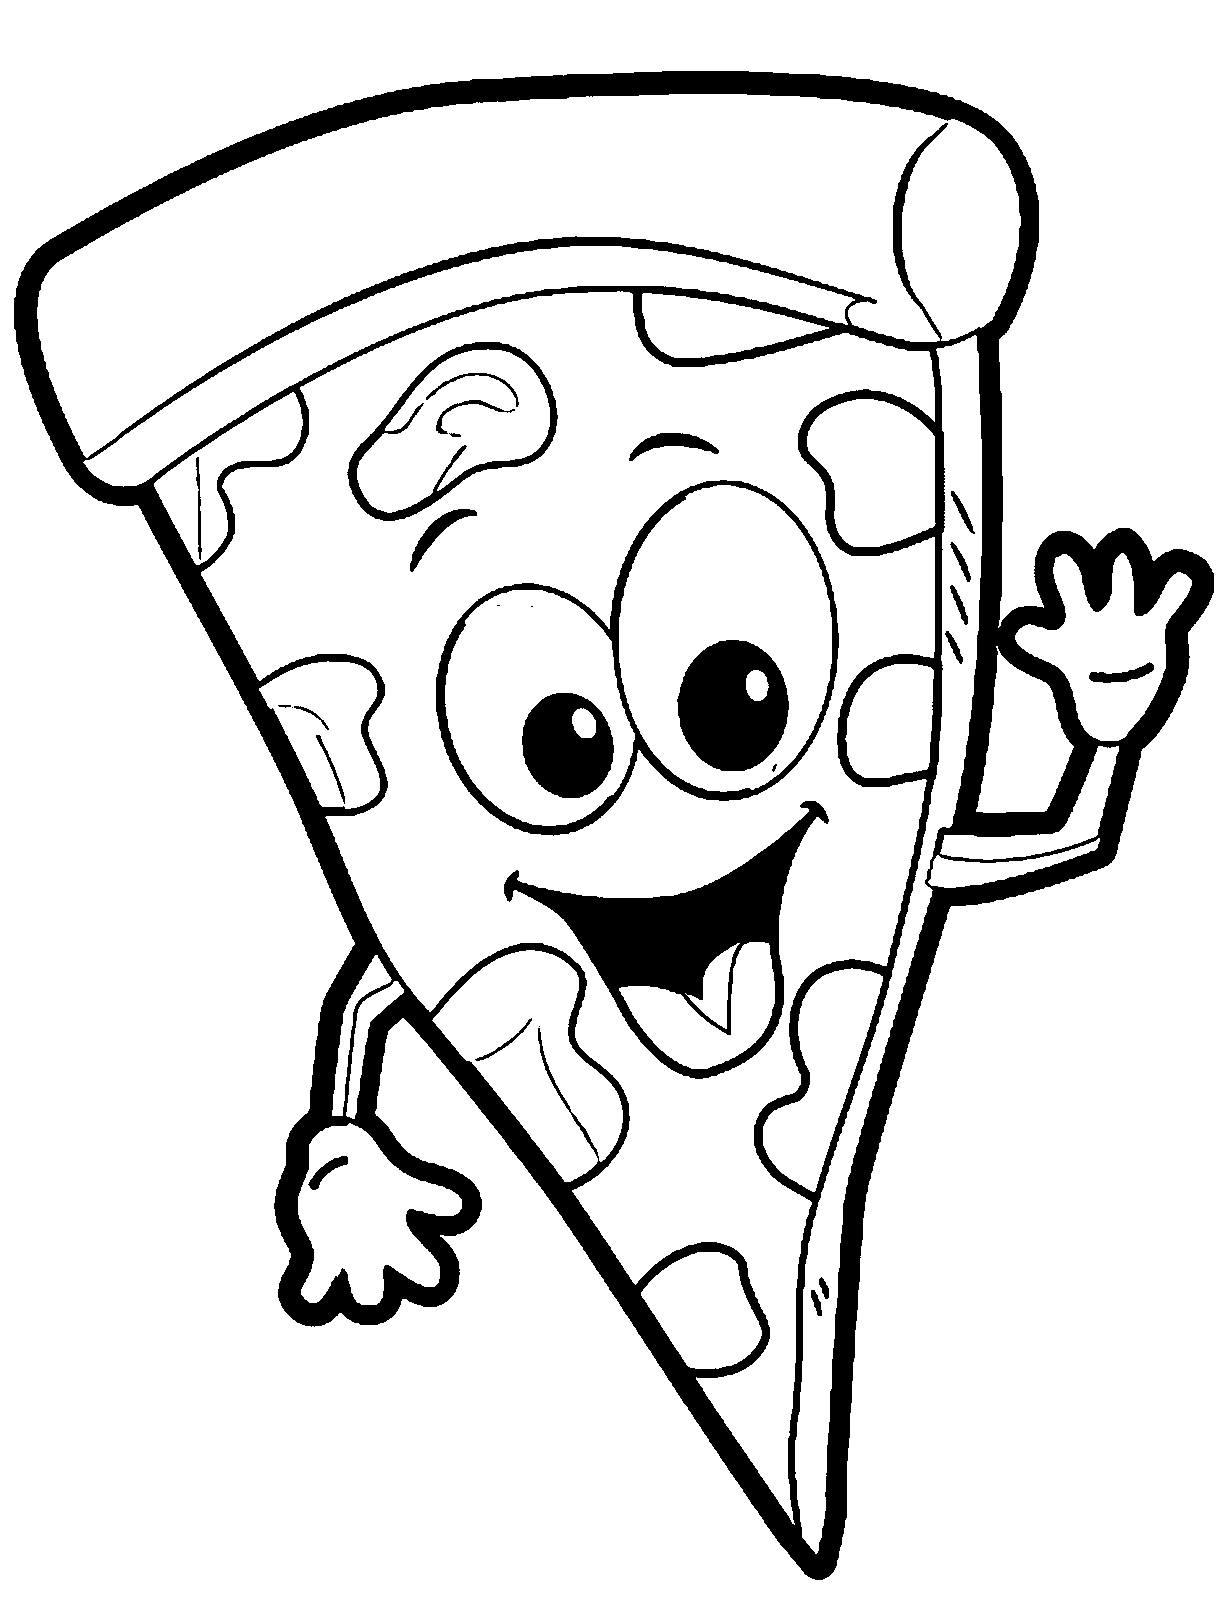 pizza-coloring-page-0033-q1